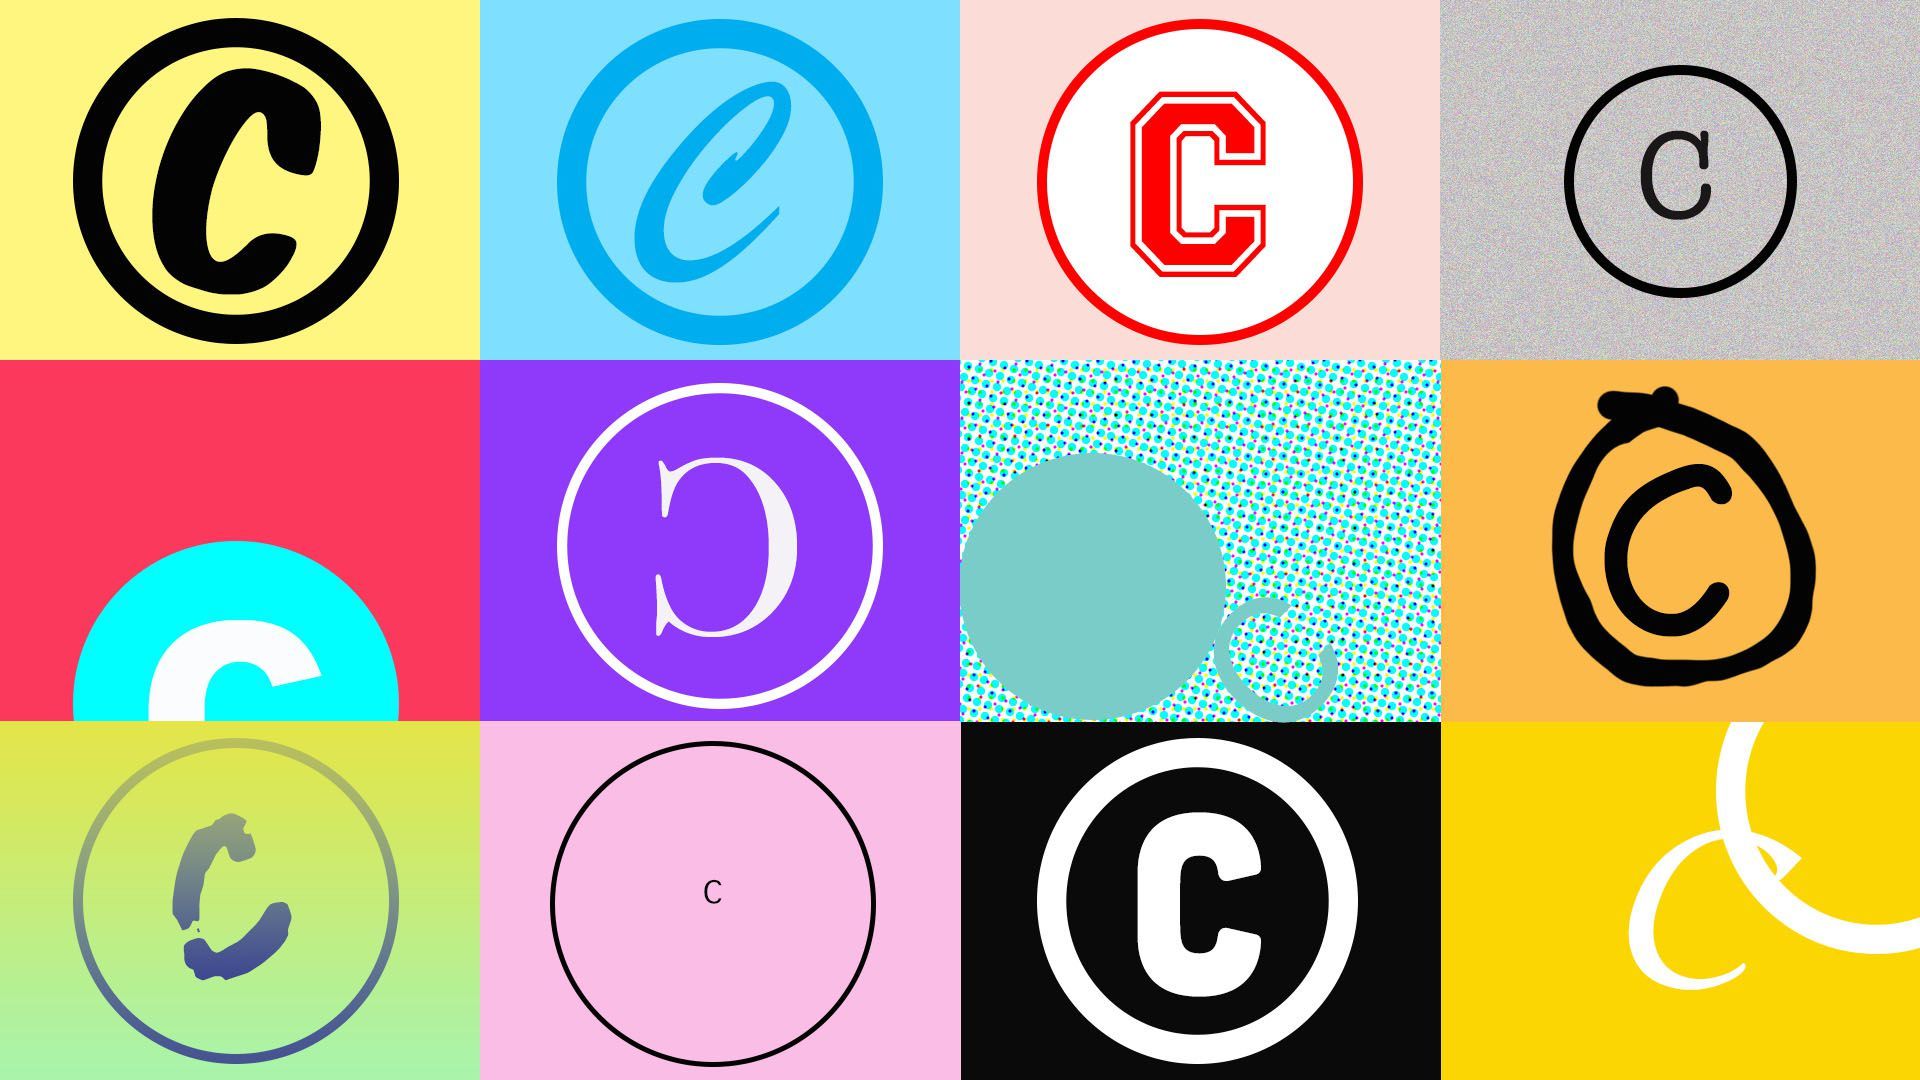 Illustration of copyright symbols in different styles and colors.